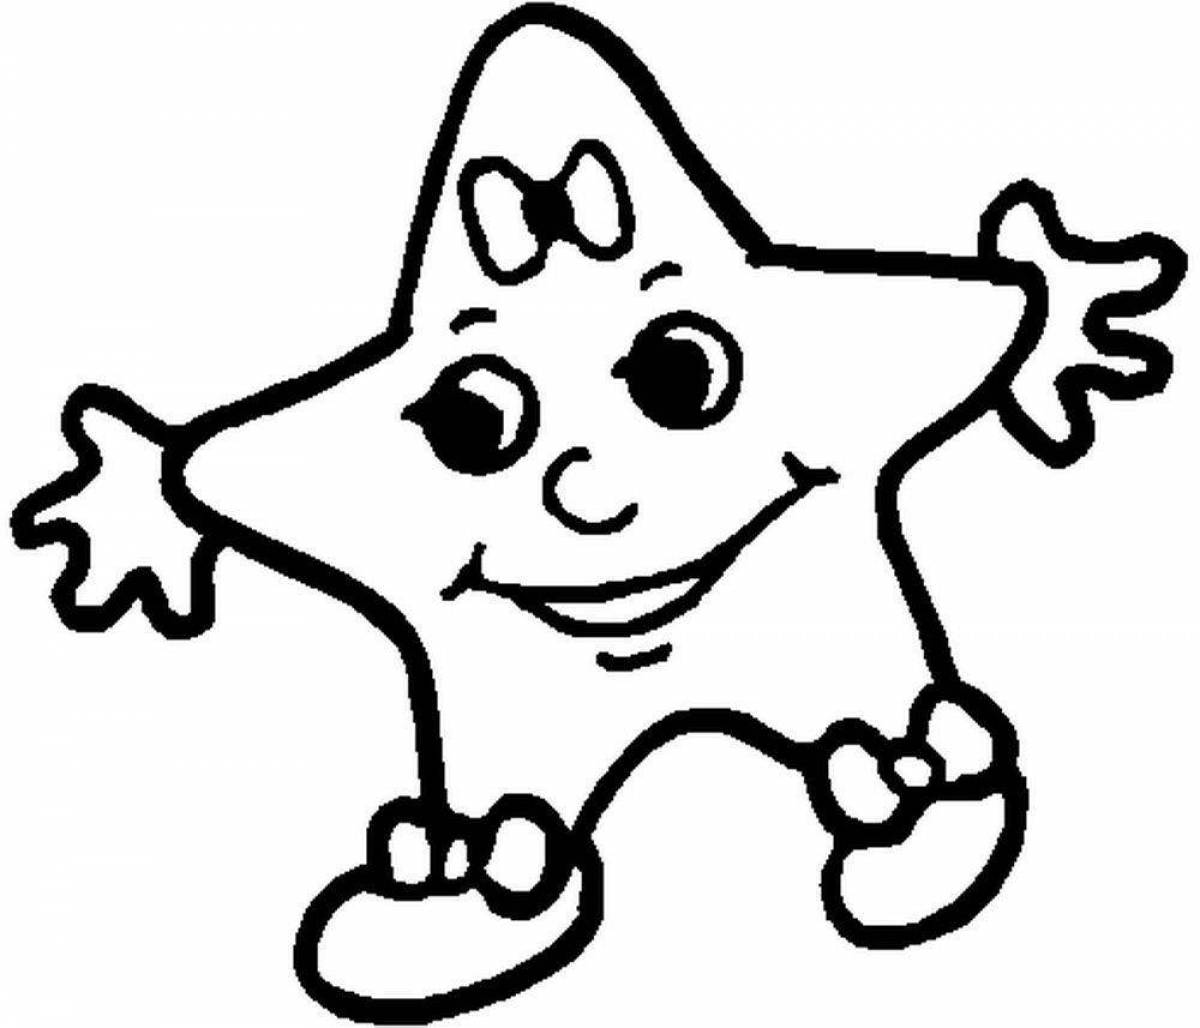 Gorgeous star coloring page for kids